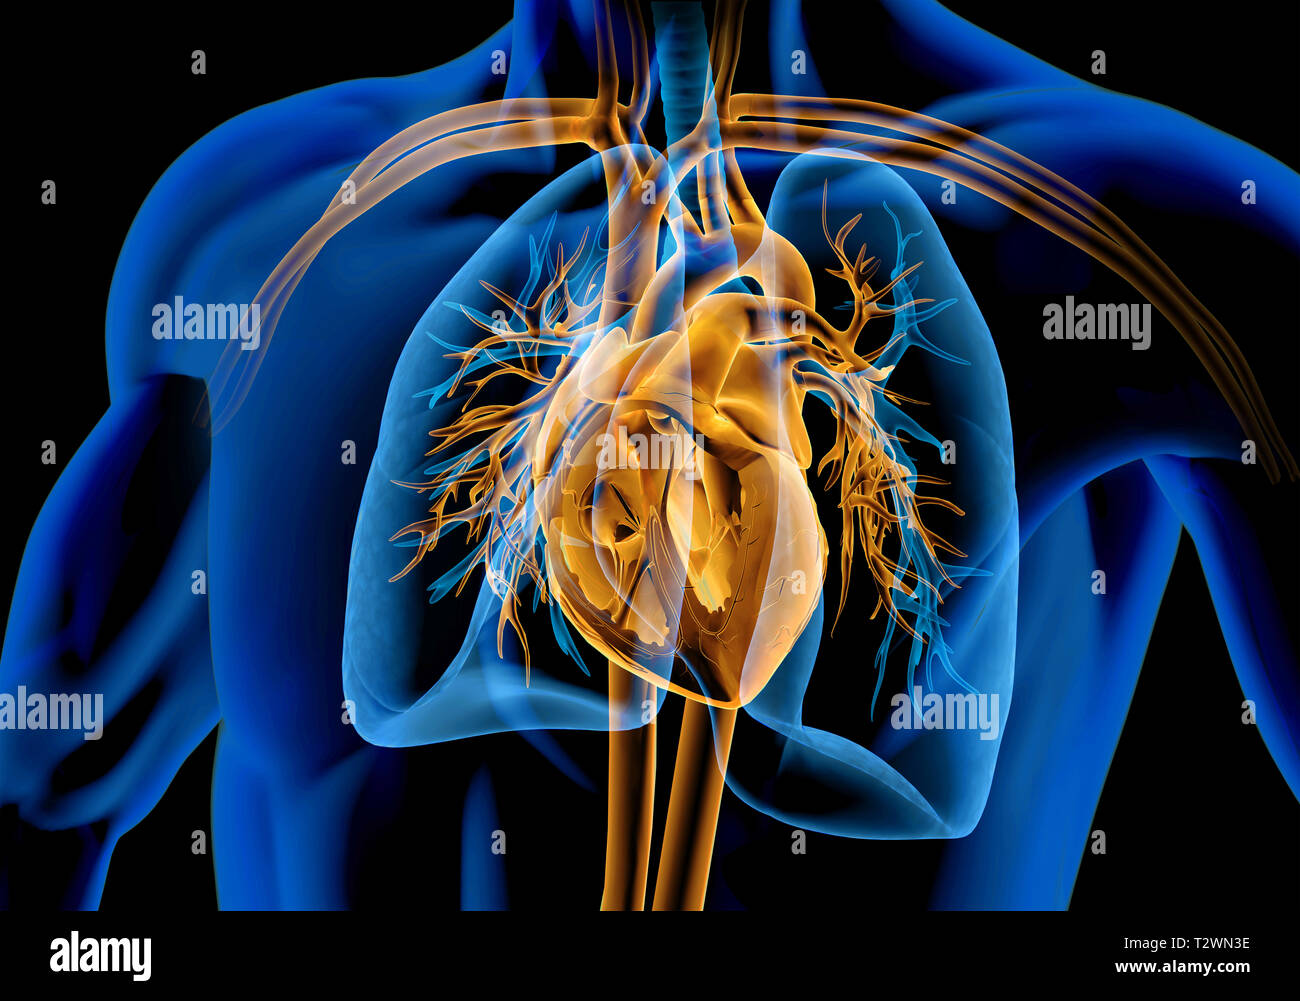 Human heart cross-section with vessels, lungs, bronchial tree and cut rib cage. X-ray effect on black background. Stock Photo